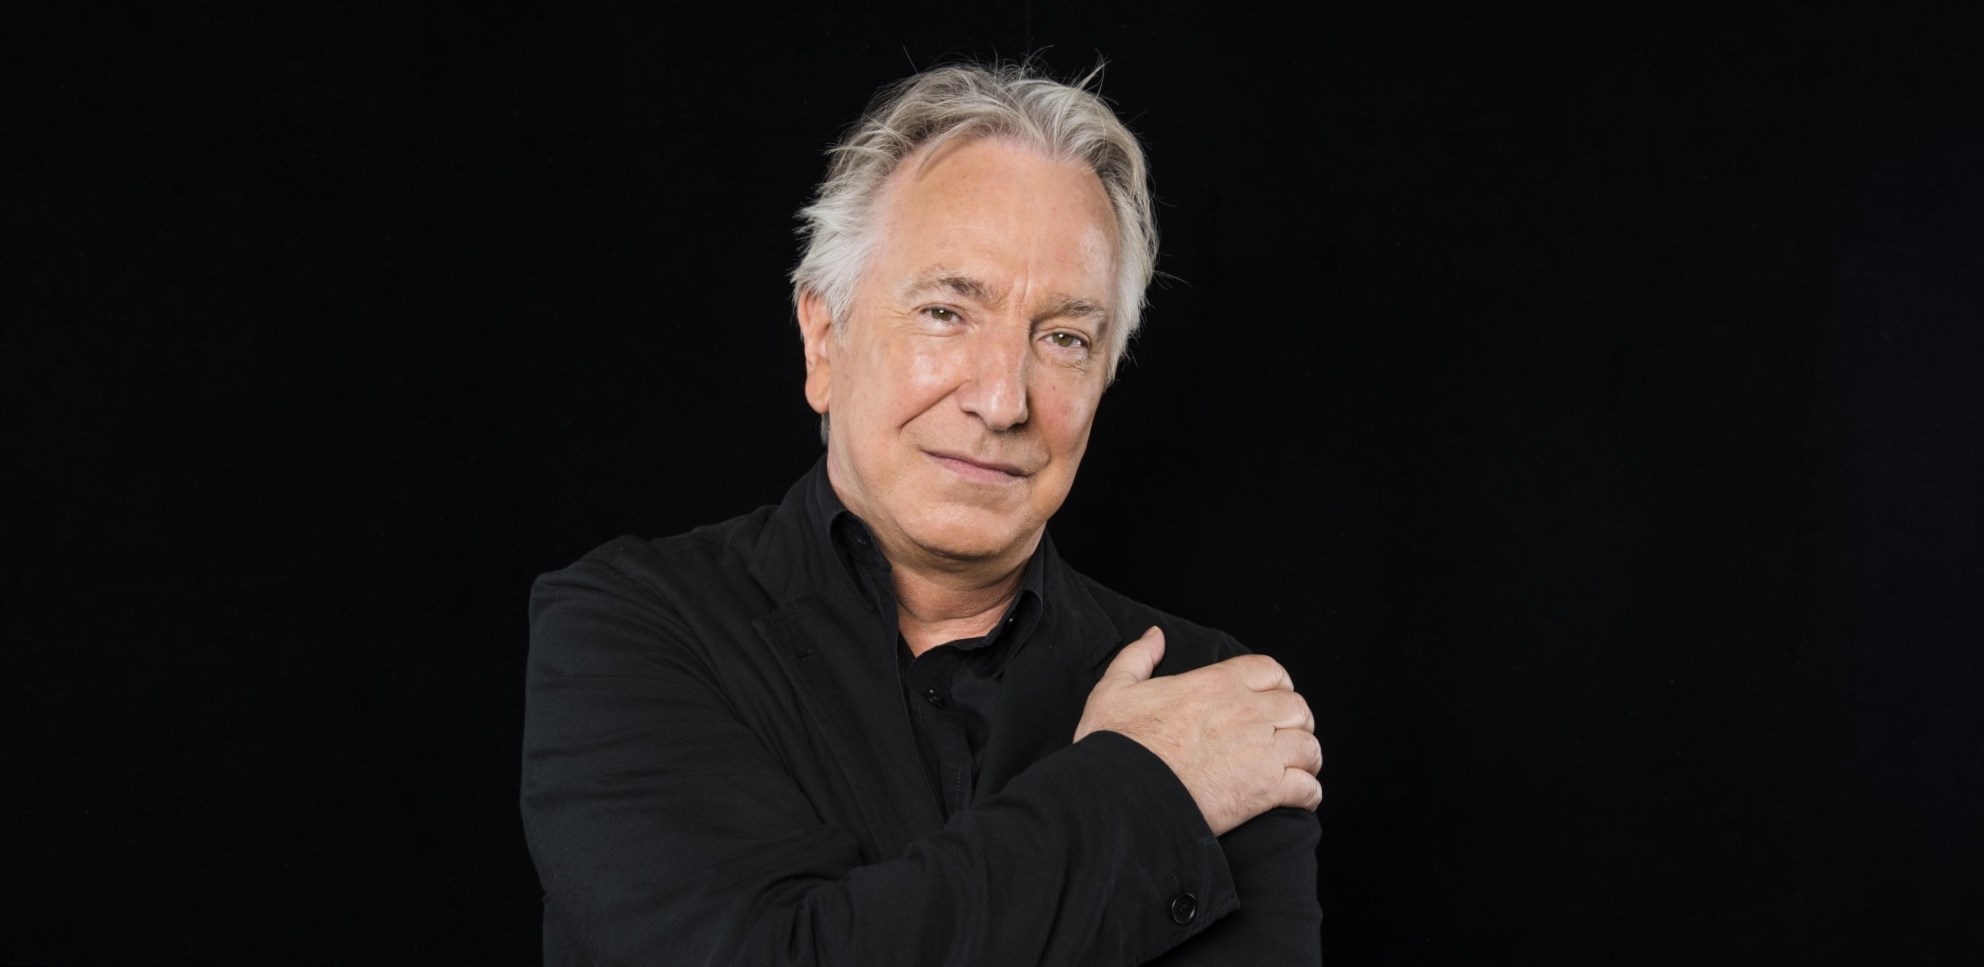 Alan Rickman weight, height and age. Body measurements!